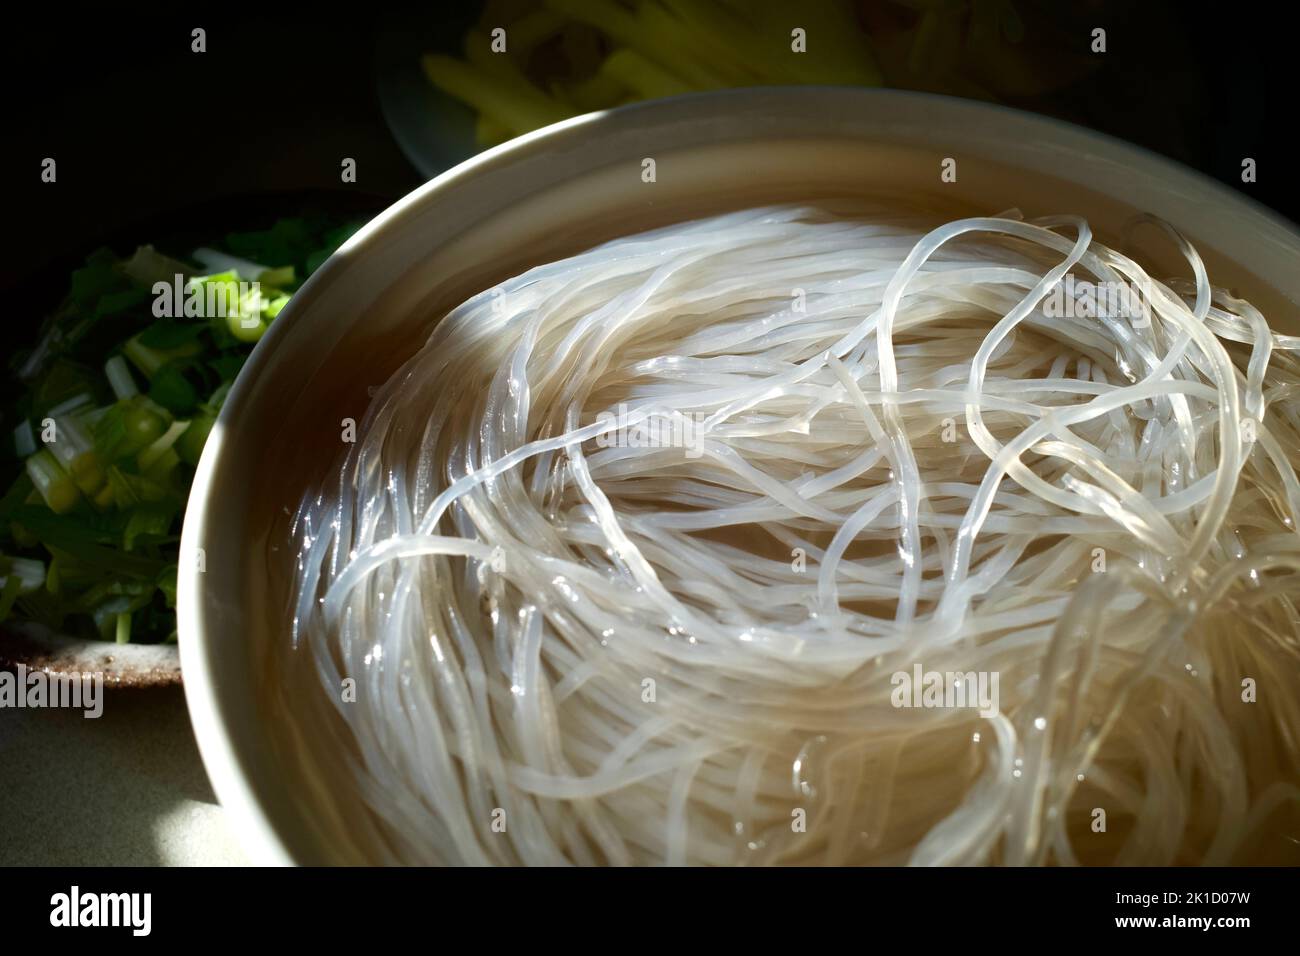 Glass noodles soaked in water. The photo was taken under natural light on a kitchen worktop. Stock Photo